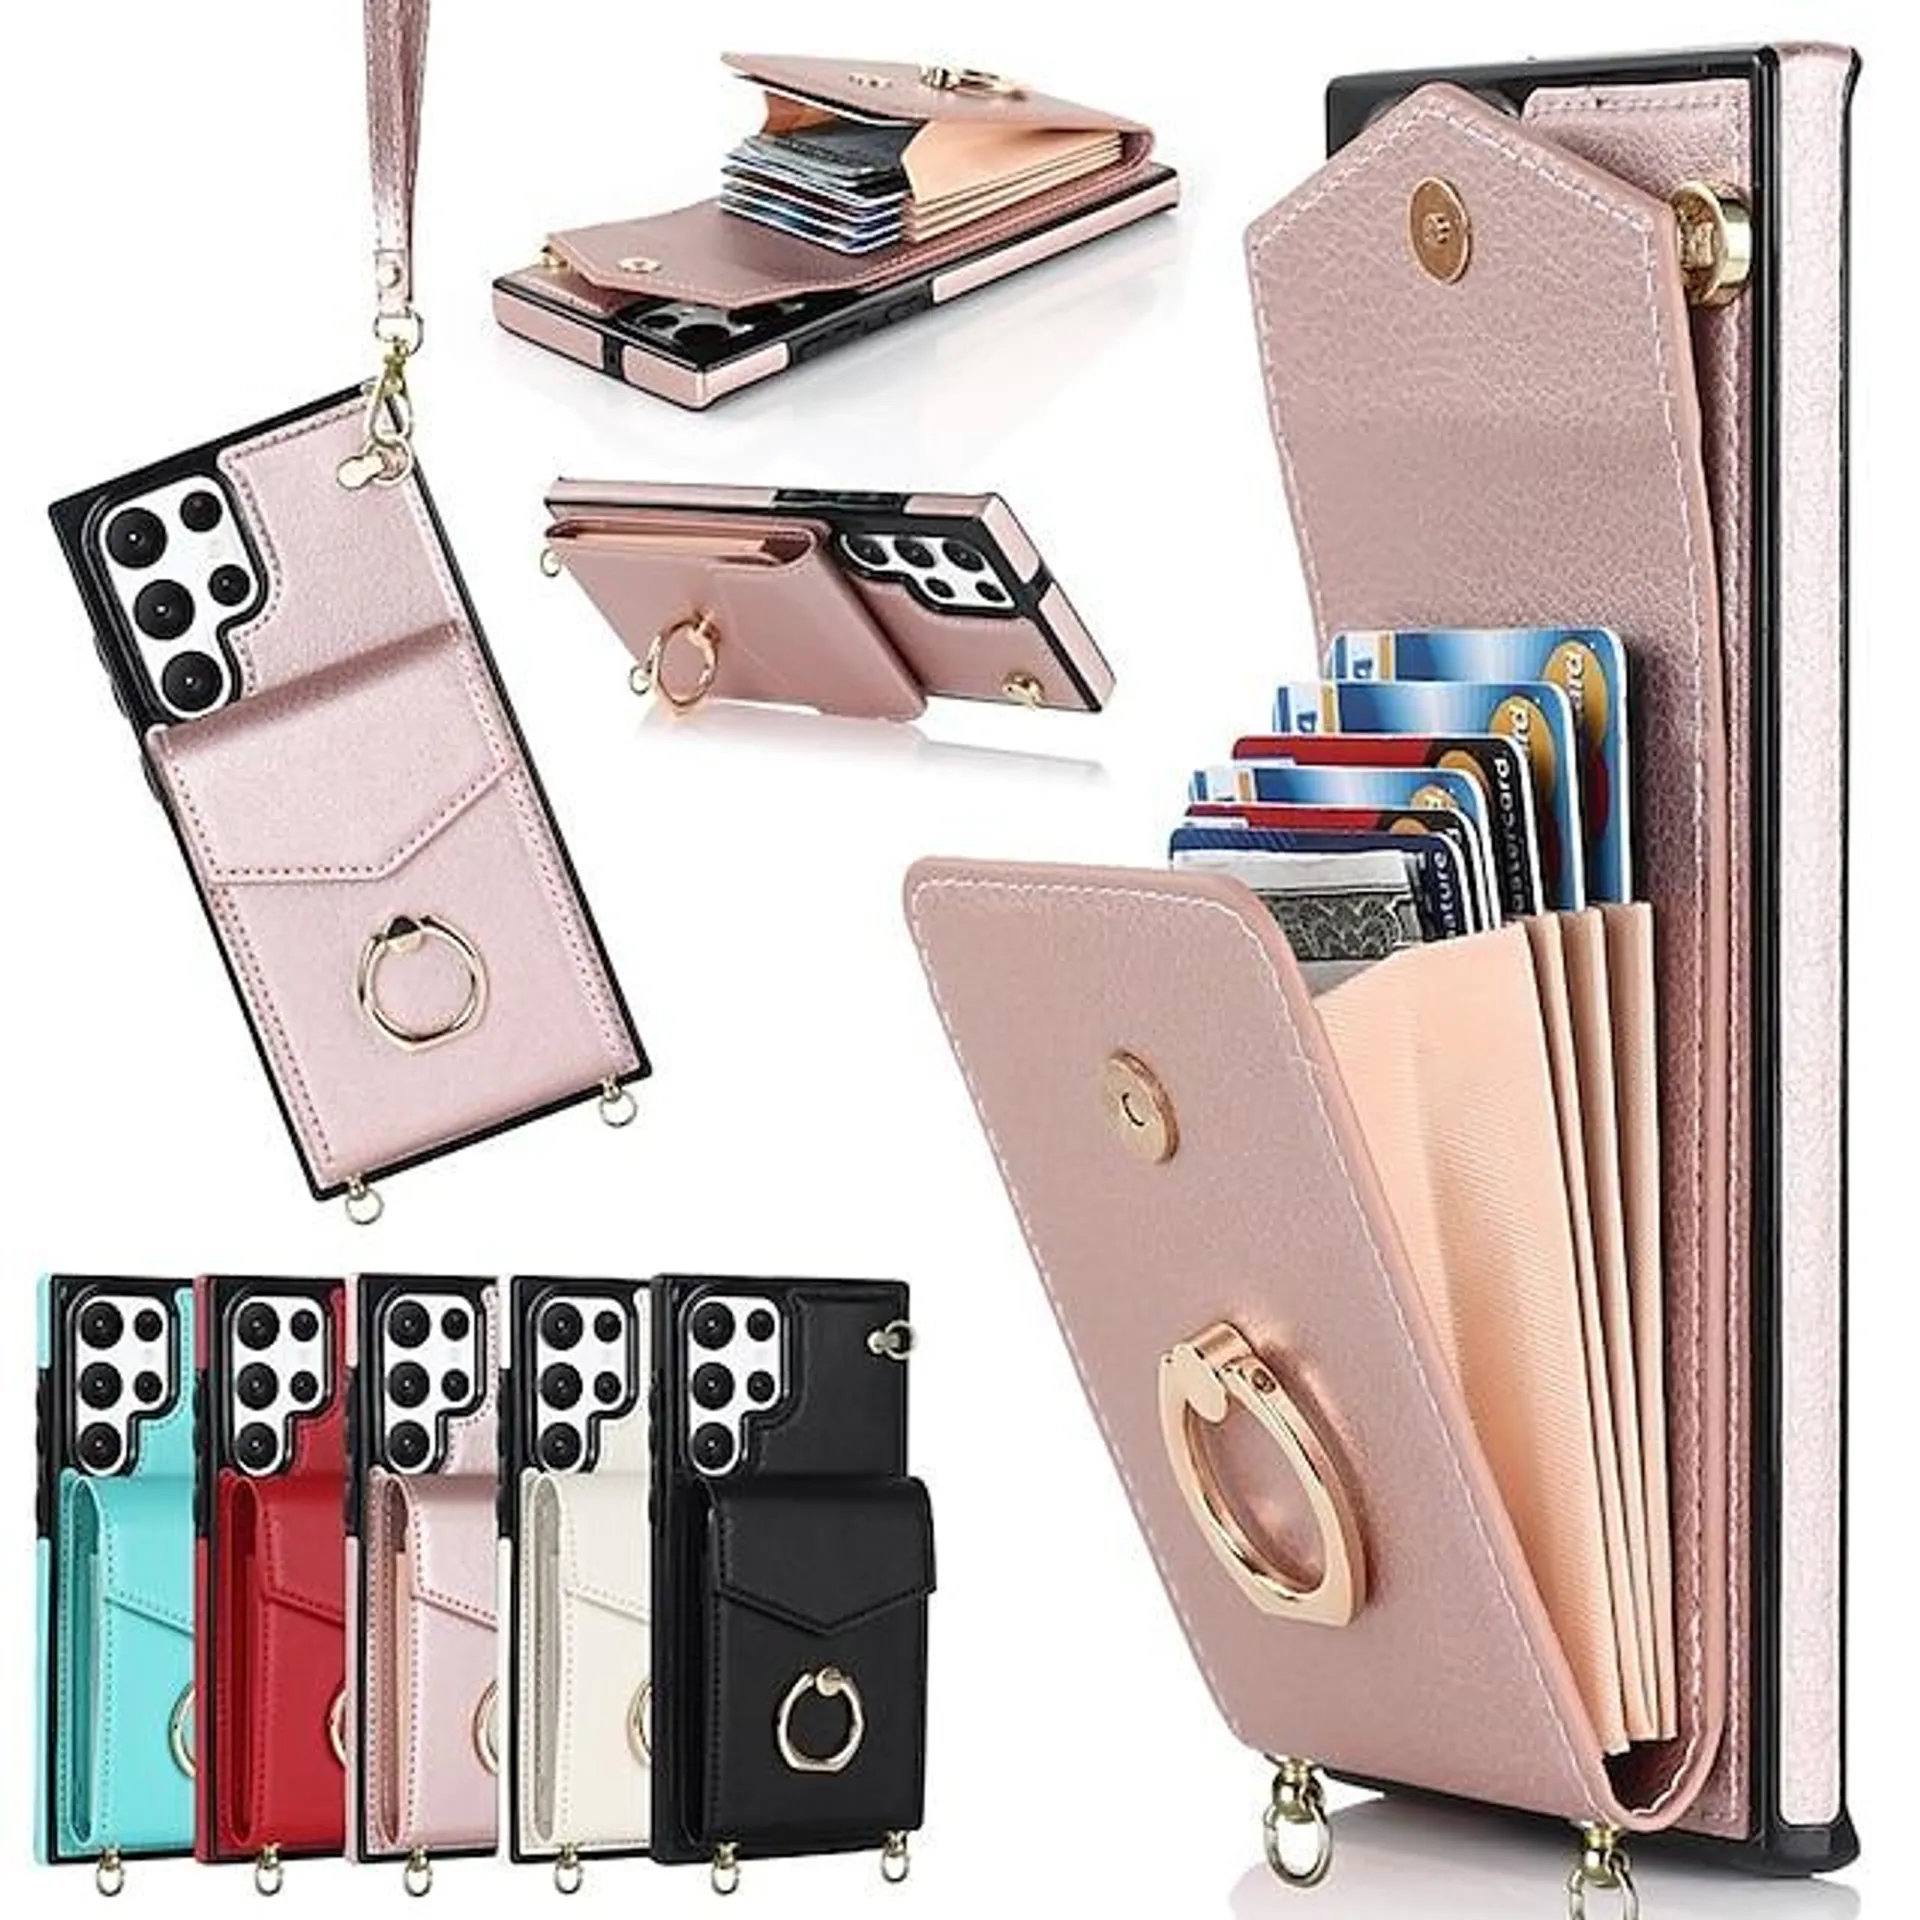 Phone Case For Samsung Galaxy S23 S22 S21 S20 Plus Ultra A54 A34 A14 A73 A53 A33 Note 20 Ultra 10 Plus Handbag Purse Wallet Case Ring Holder Anti-theft with Removable Cross Body Strap TPU PU Leather